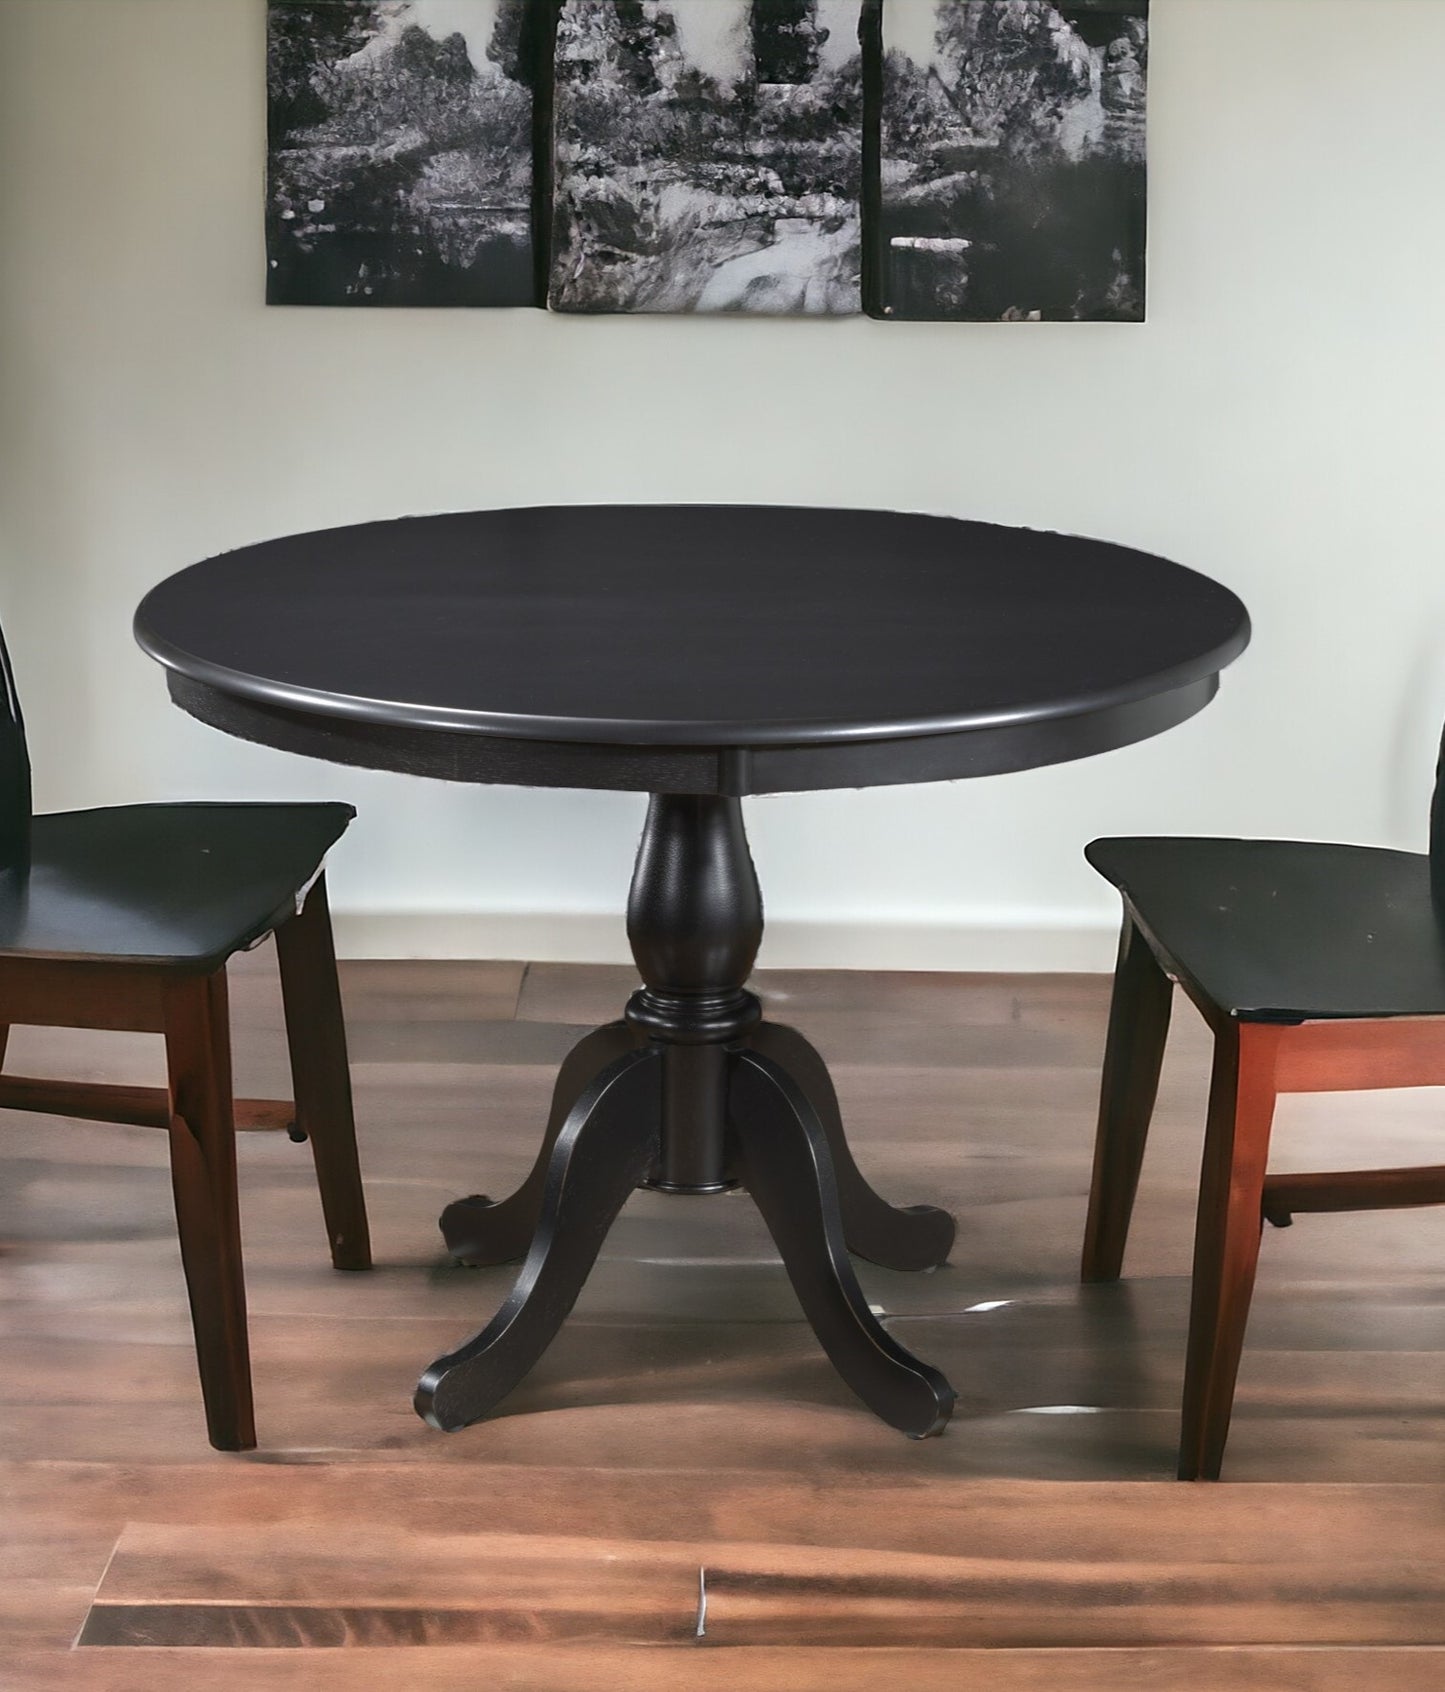 42" Black Rounded Solid Manufactured Wood And Solid Wood Pedestal Base Dining Table